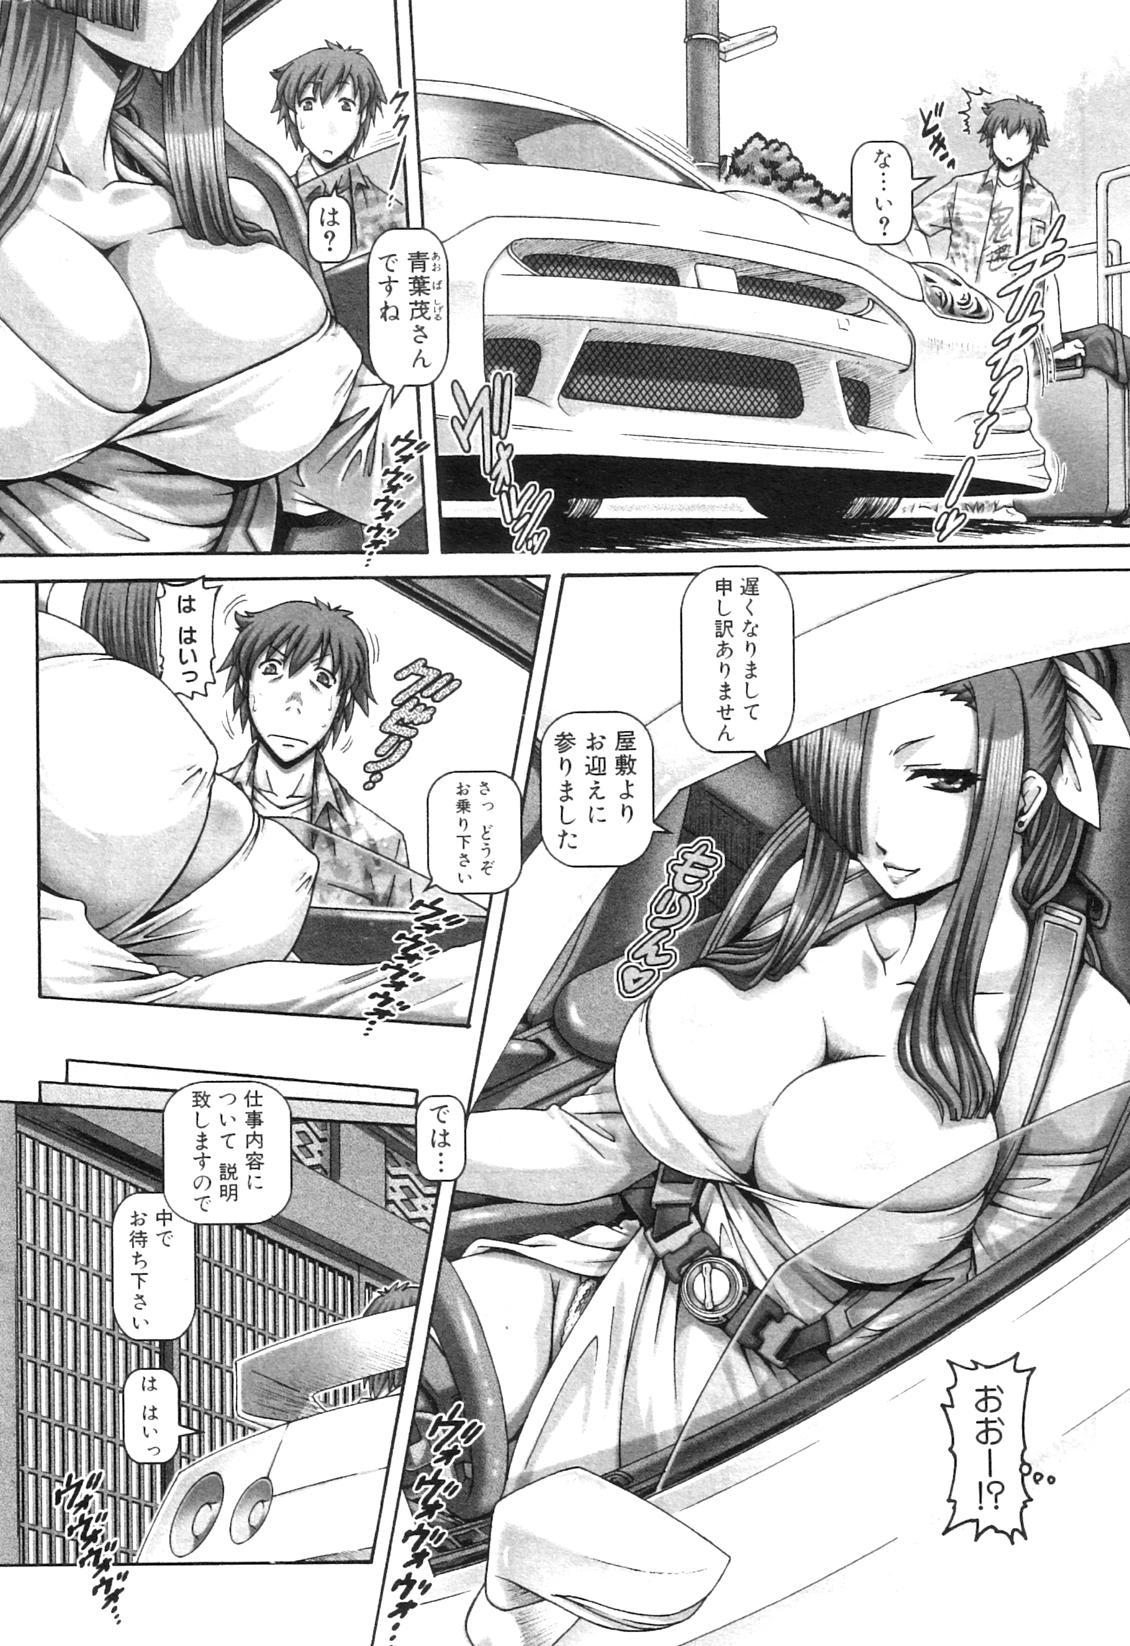 Blowjobs COMIC MILF 2012-07 Vol. 7 Moaning - Page 8